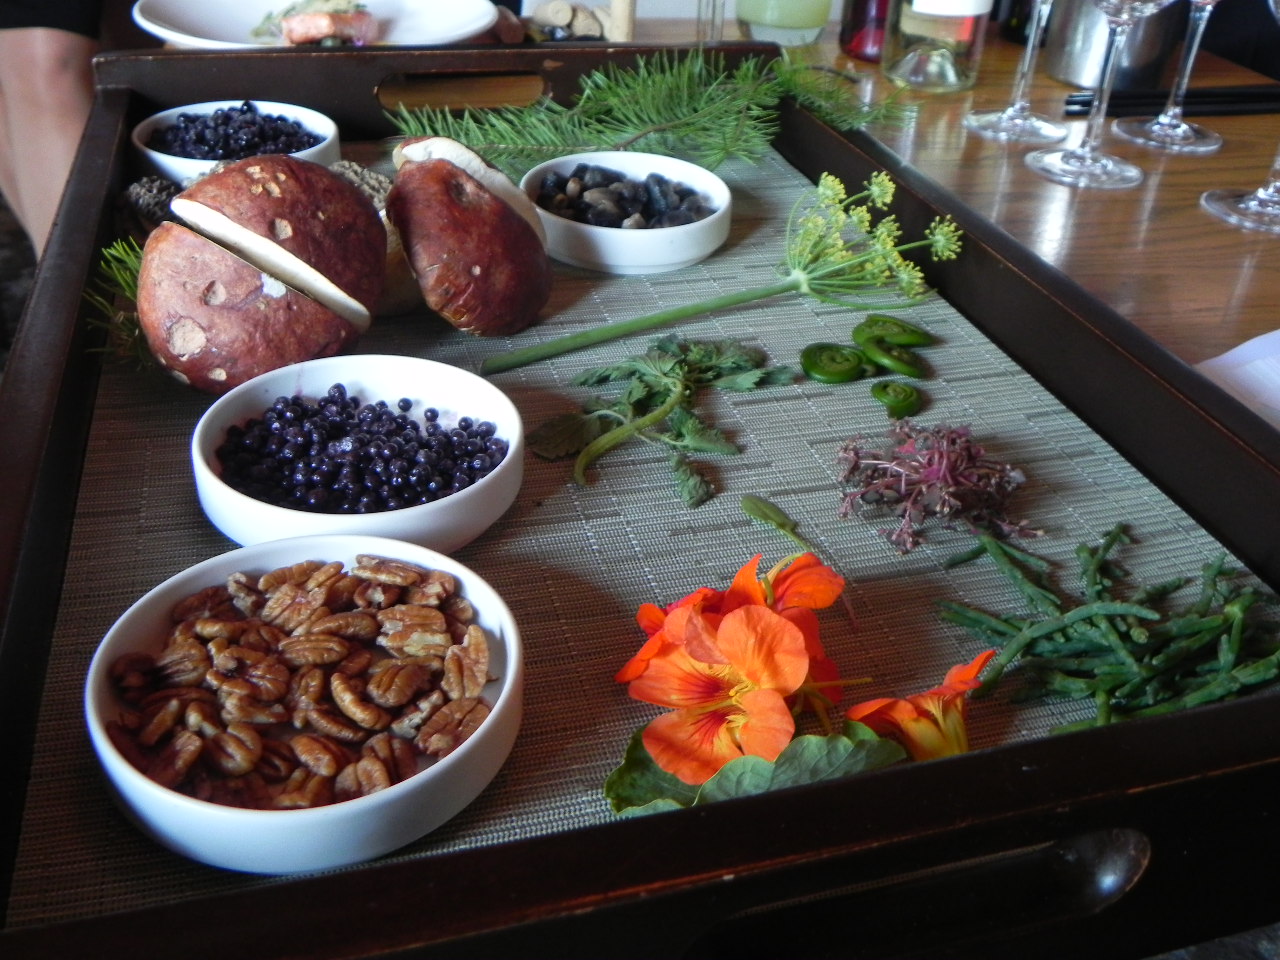 A display of wild foods gathered by Chef Kory Stewart and foraging expert Connie Green at the third annual Wild Foods dinner on June 6.